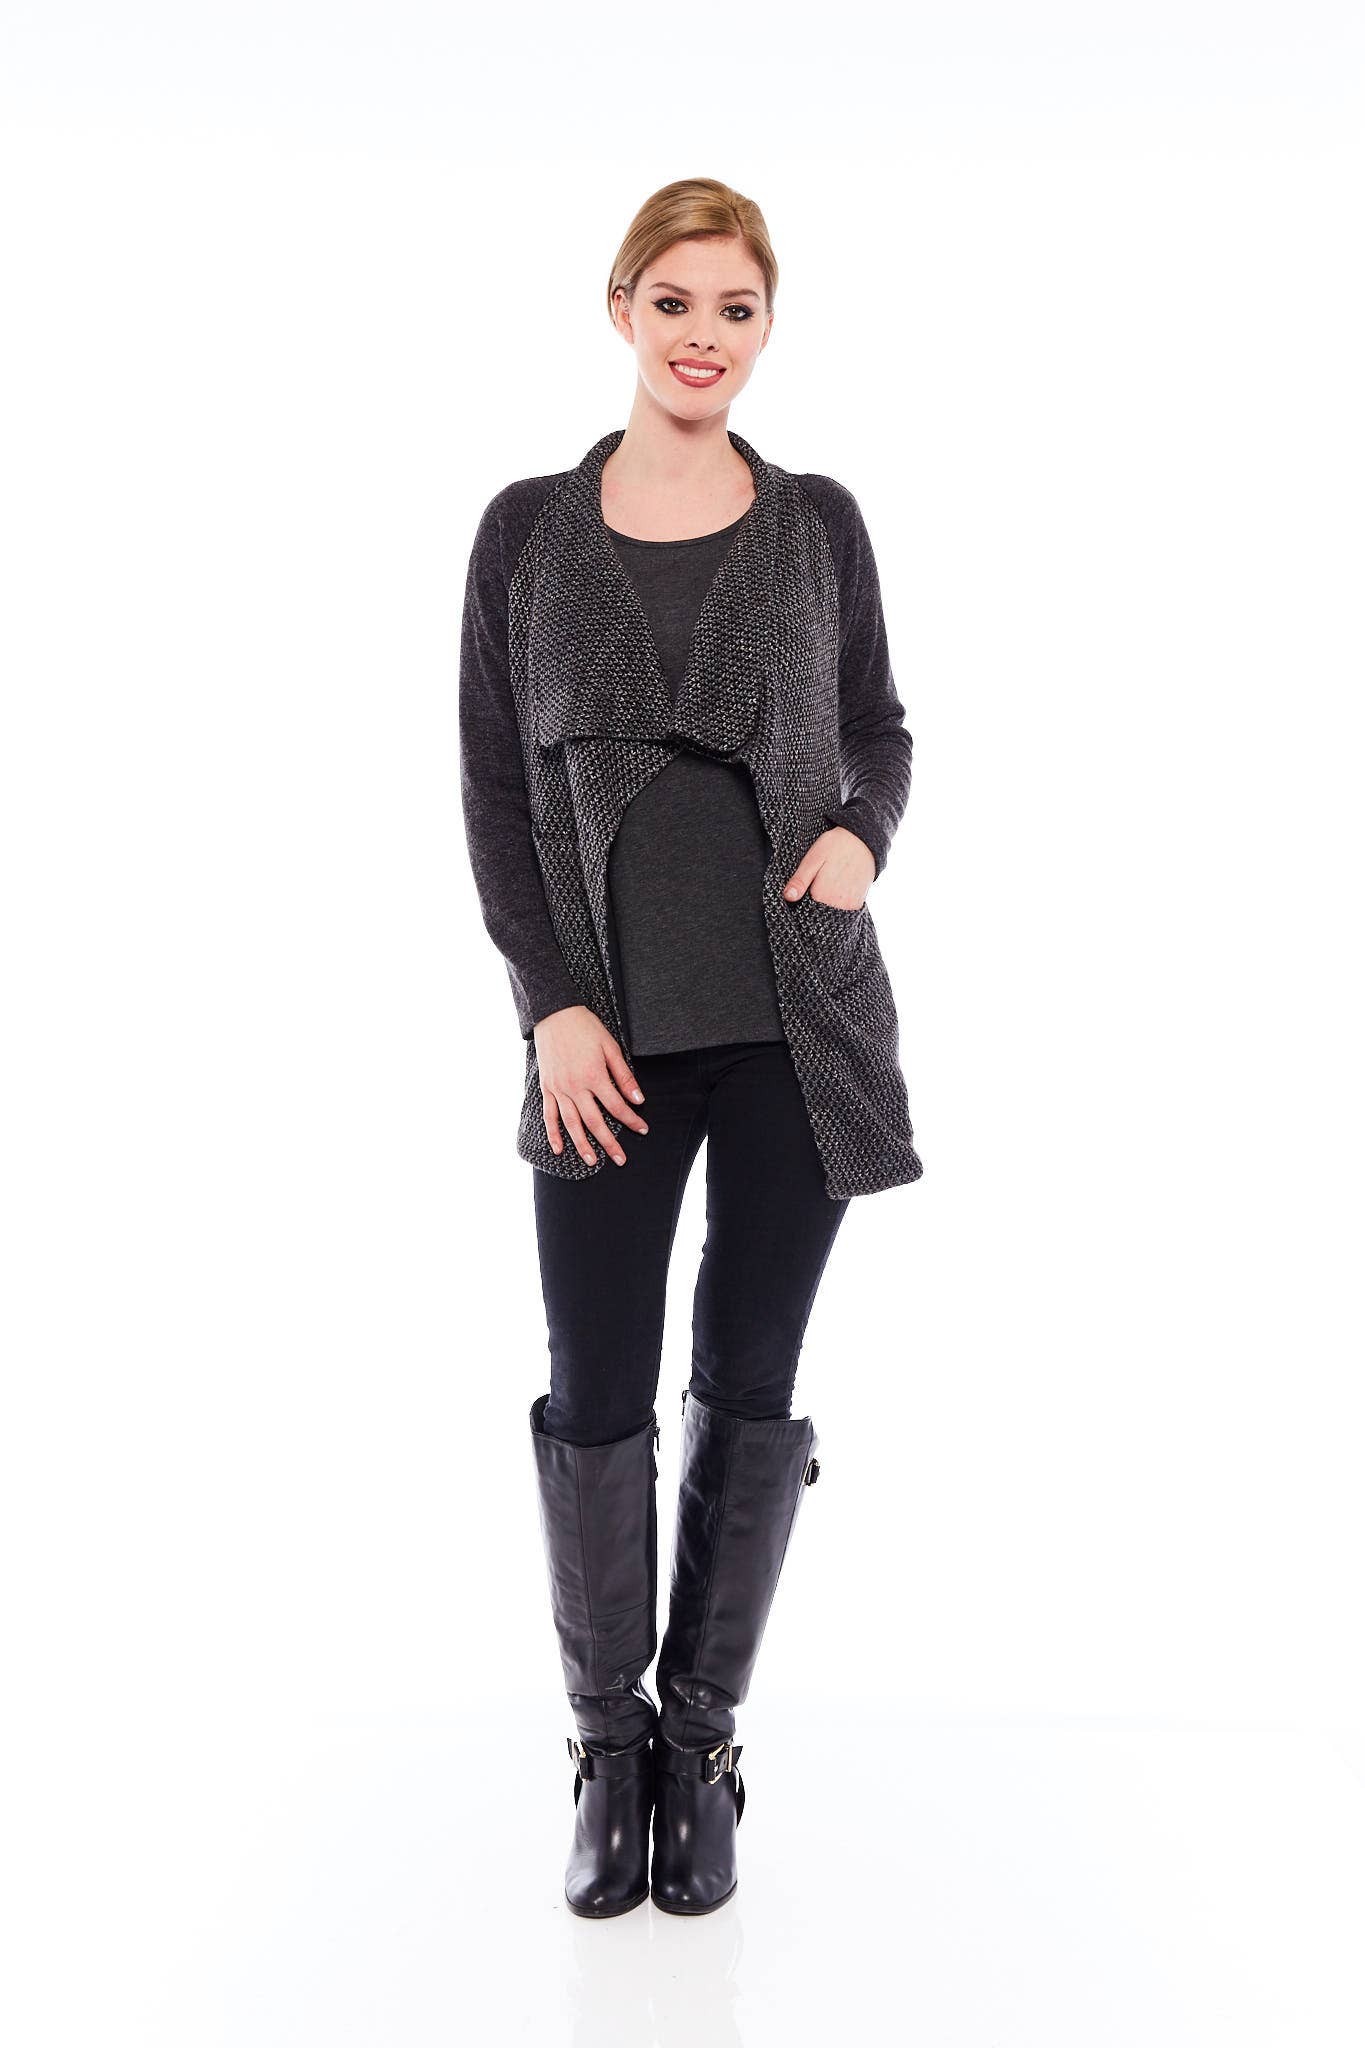 THE TRENDING CARDIGAN IN CHARCOAL BLACK